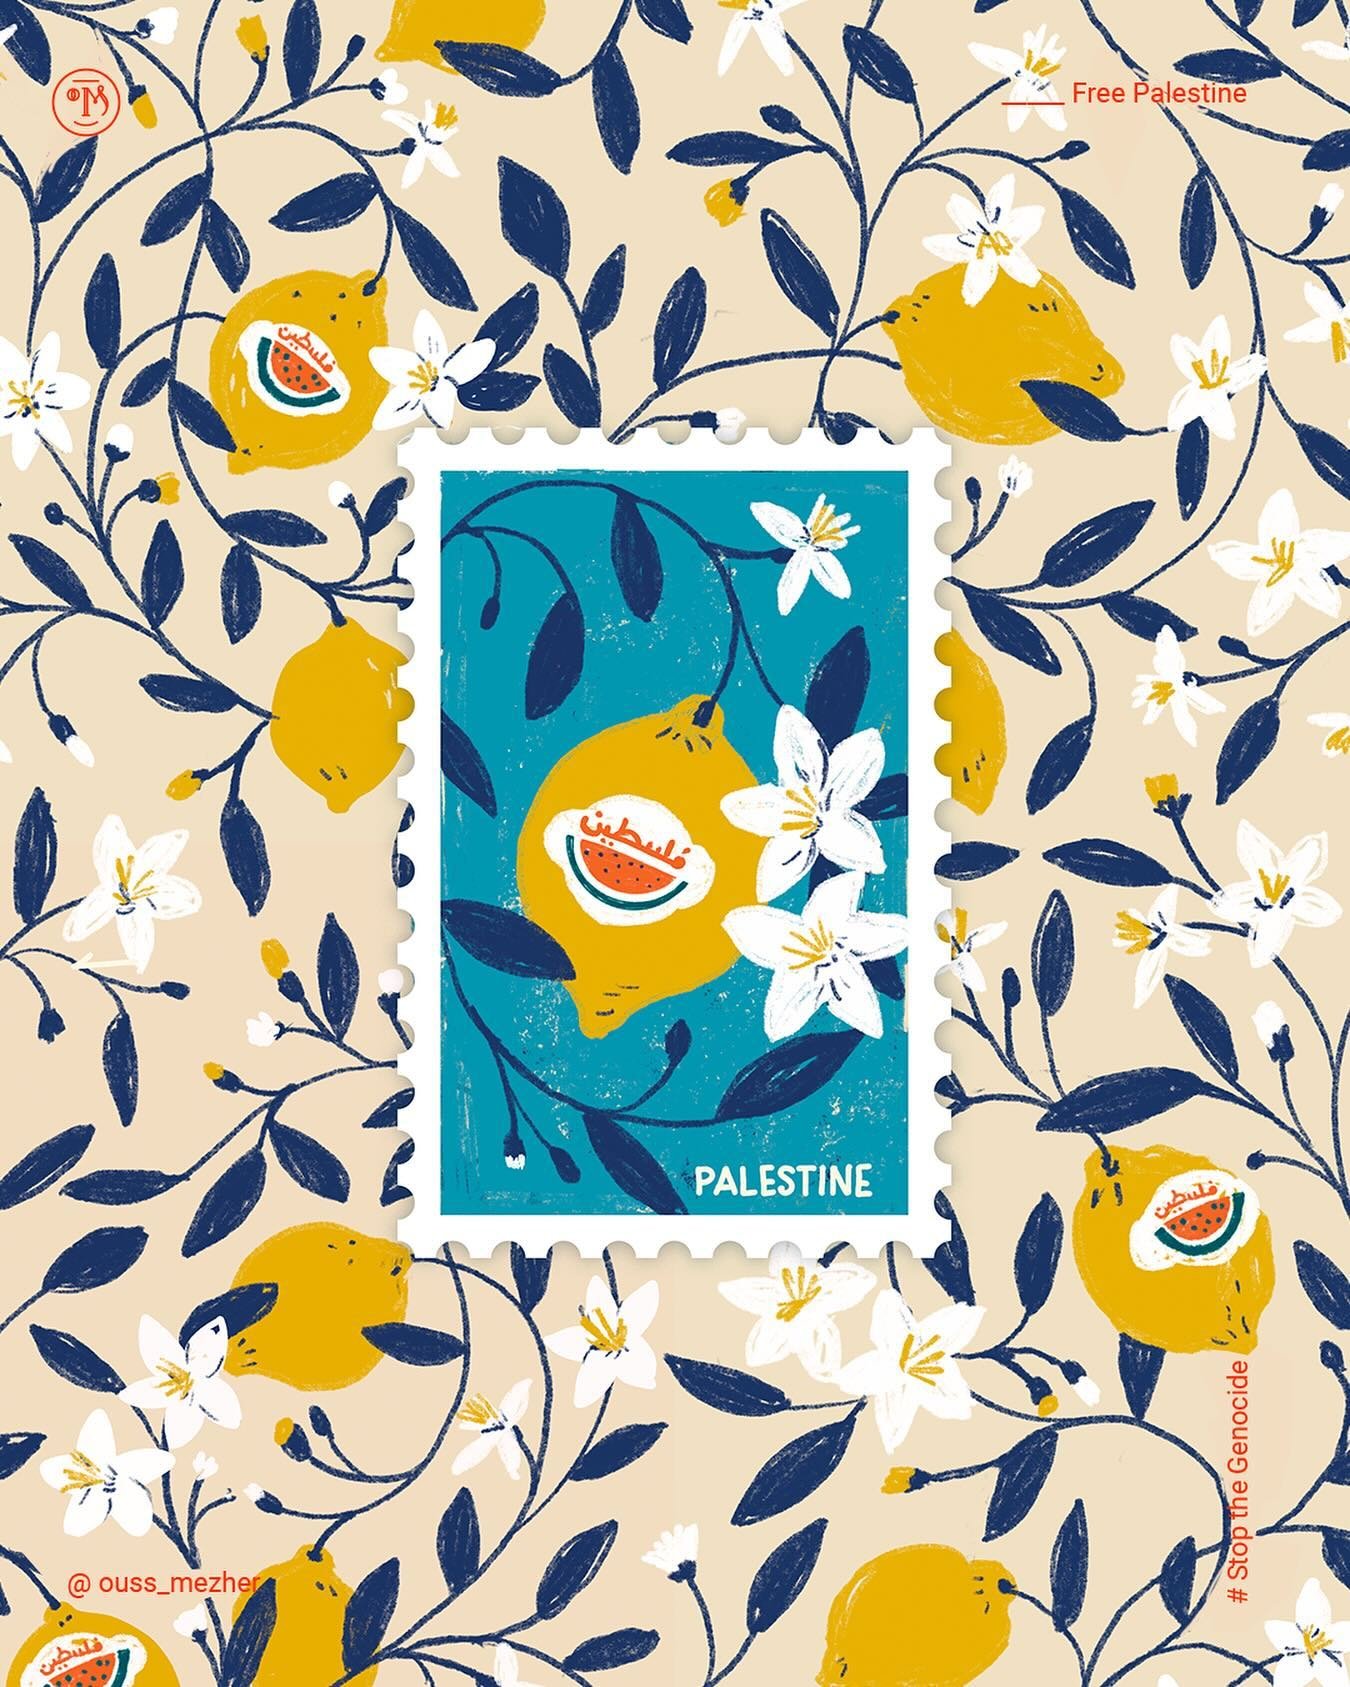 &hellip;thinking of P a l e s t i n e
What a f$&amp;ked up world, watching them starve and be slaughtered and all we can do is manifest and boycott&hellip;.
.
.
#lemonpattern #patternprocreate #stampillustration #justiceforpalestine #lemons